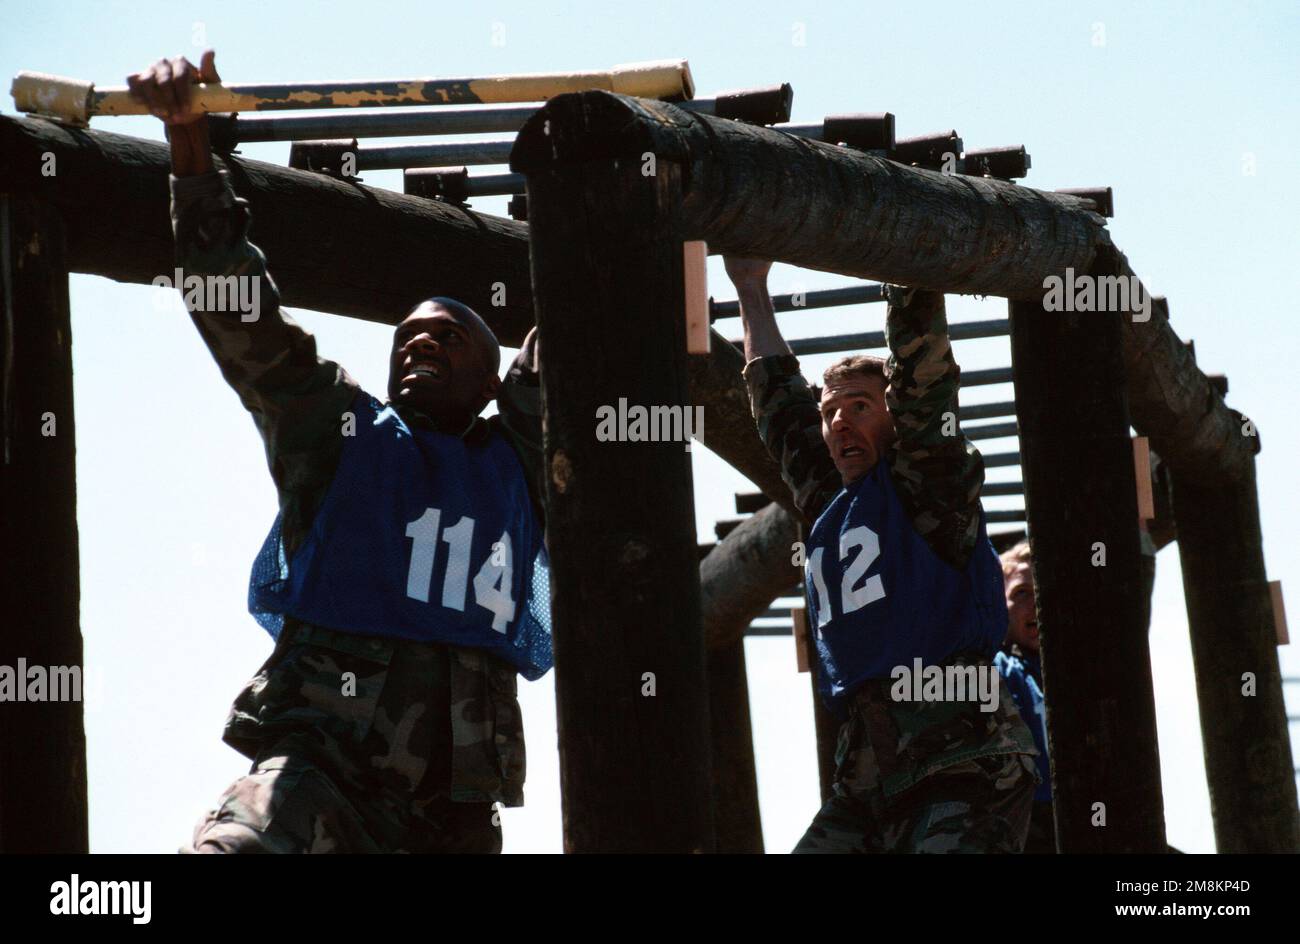 Competing at PEACEKEEPER CHALLENGE '96, US Air Force SENIOR AIRMAN Joseph A. Weyers (left) and US Air Force Technical Sergeant Kevin Westermeyer (right) conquer the monkey bars. Fourteen security police teams representing 12 Air Force major commands, the Royal Air Force and the Canadian Forces Air Command, fought it out during a week of grueling competition called PEACEKEEPER CHALLENGE. This image was used in the January 1996 issue of AIRMAN Magazine. Subject Operation/Series: PEACEKEEPER CHALLENGE '96 Base: Kirtland Air Force Base State: New Mexico (NM) Country: United States Of America (USA) Stock Photo